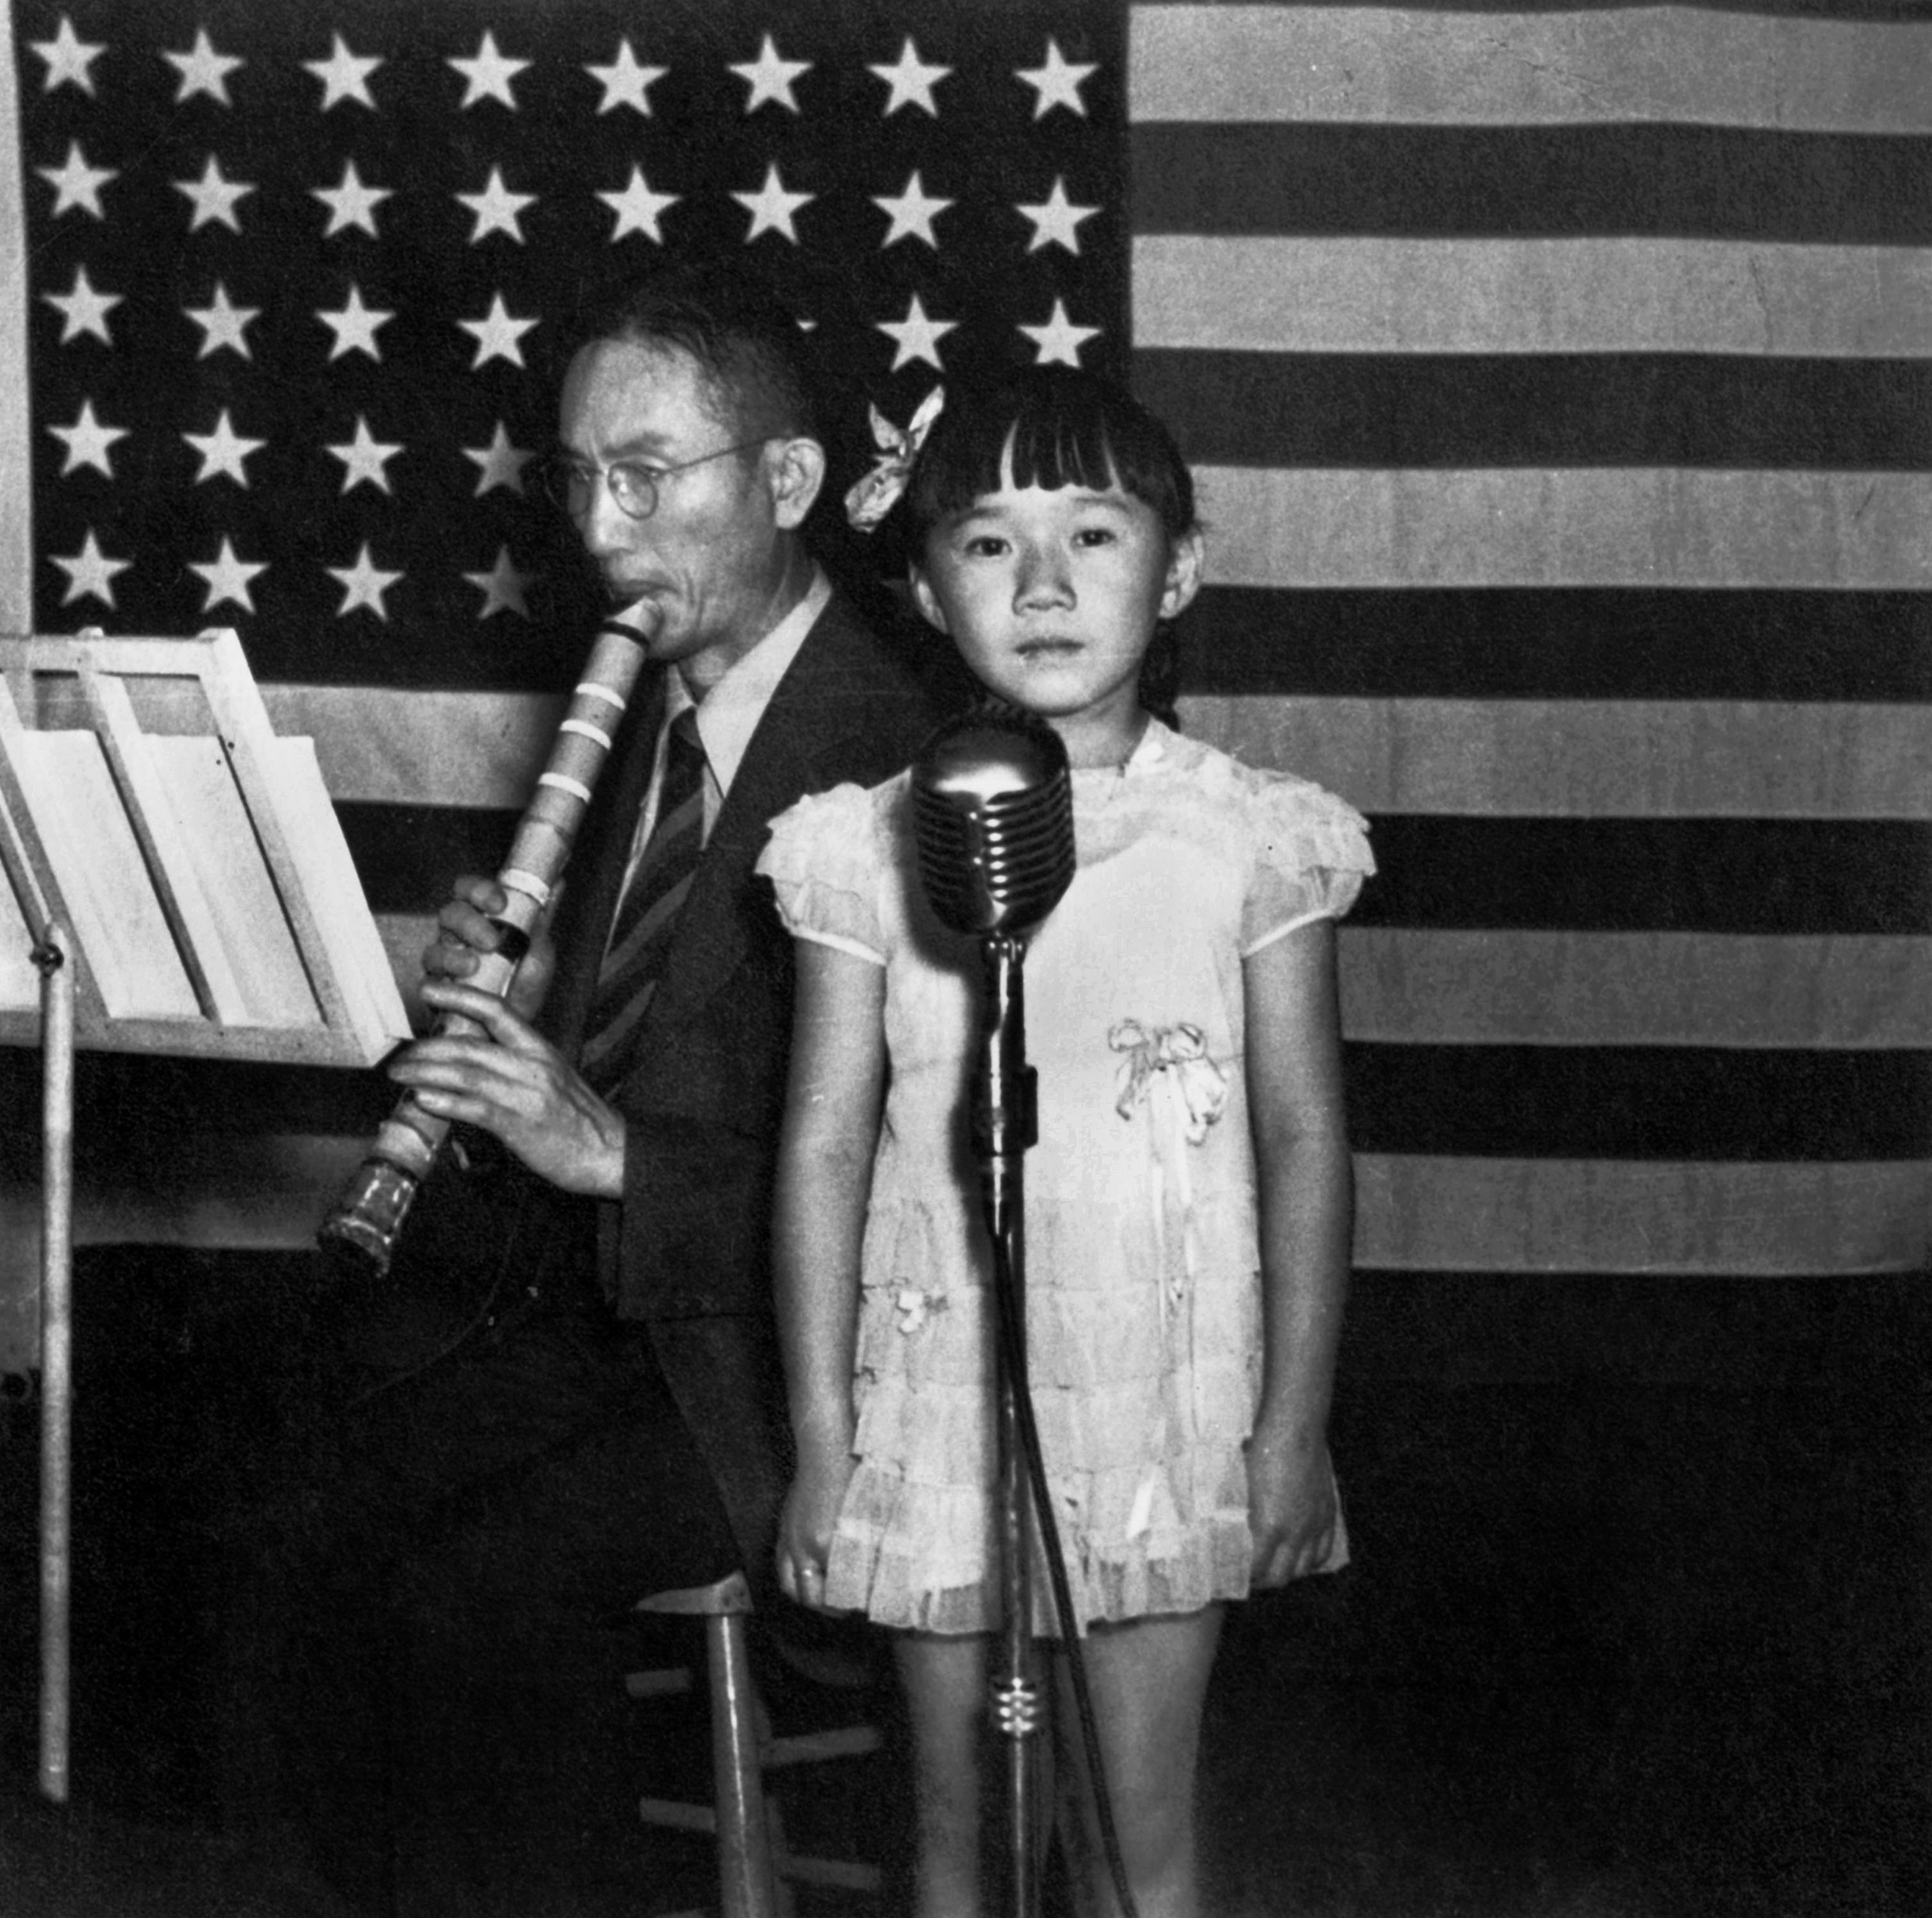 A musician and a girl in Topaz Internment Camp in Utah, July 1945 (Apic/Getty Images)